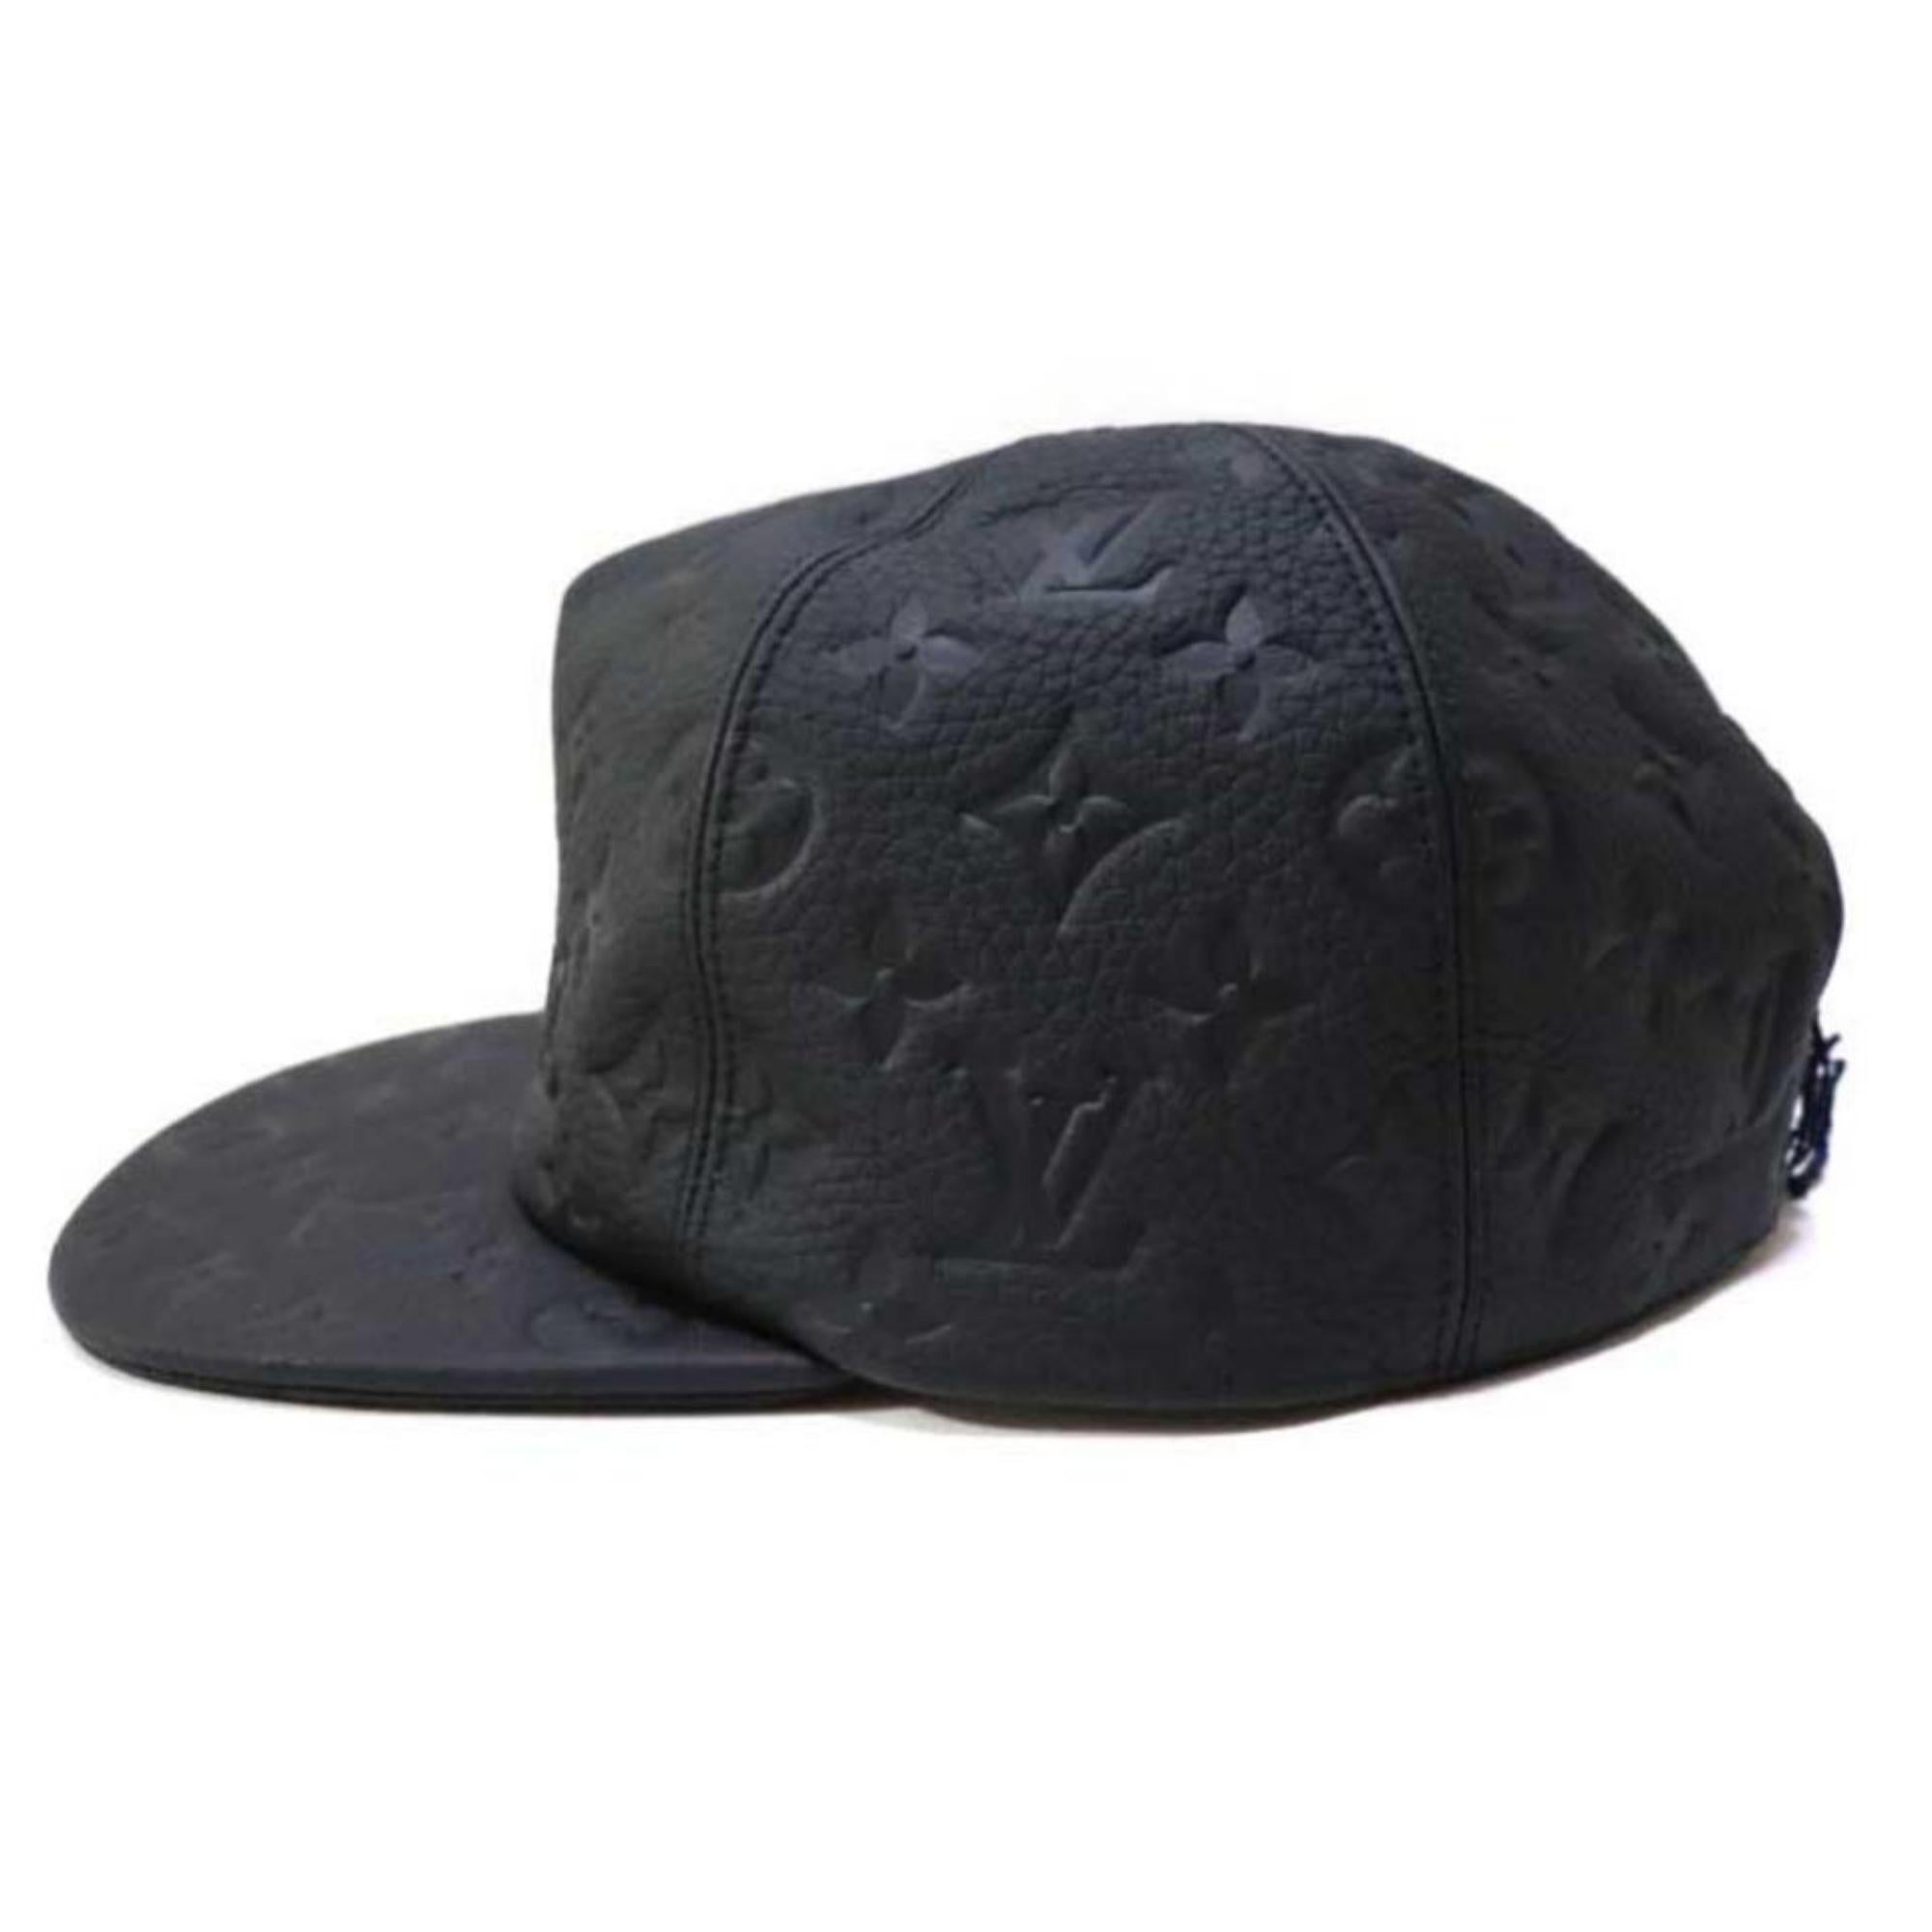 Louis Vuitton Black Ss19 Virgil Abloh Leather Noir Baseball Cap 870231 Hat In New Condition For Sale In Forest Hills, NY